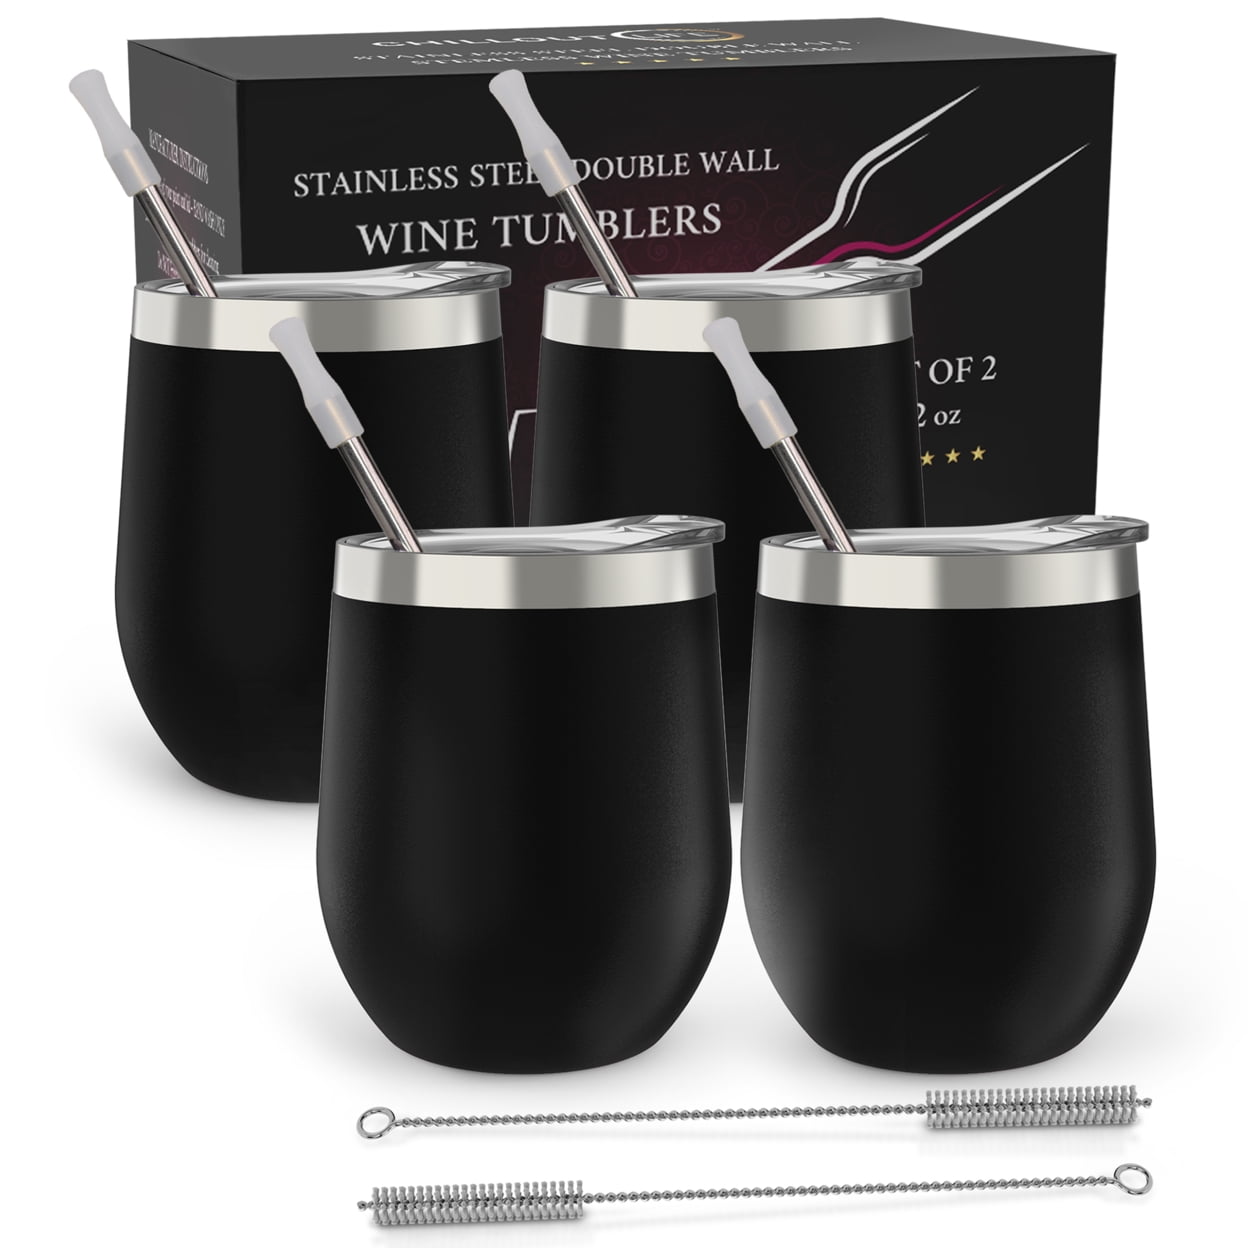 CHILLOUT LIFE Stainless Steel Wine Tumblers 2 Pack 12 oz - Double Wall  Vacuum Insulated Wine Cups wi…See more CHILLOUT LIFE Stainless Steel Wine